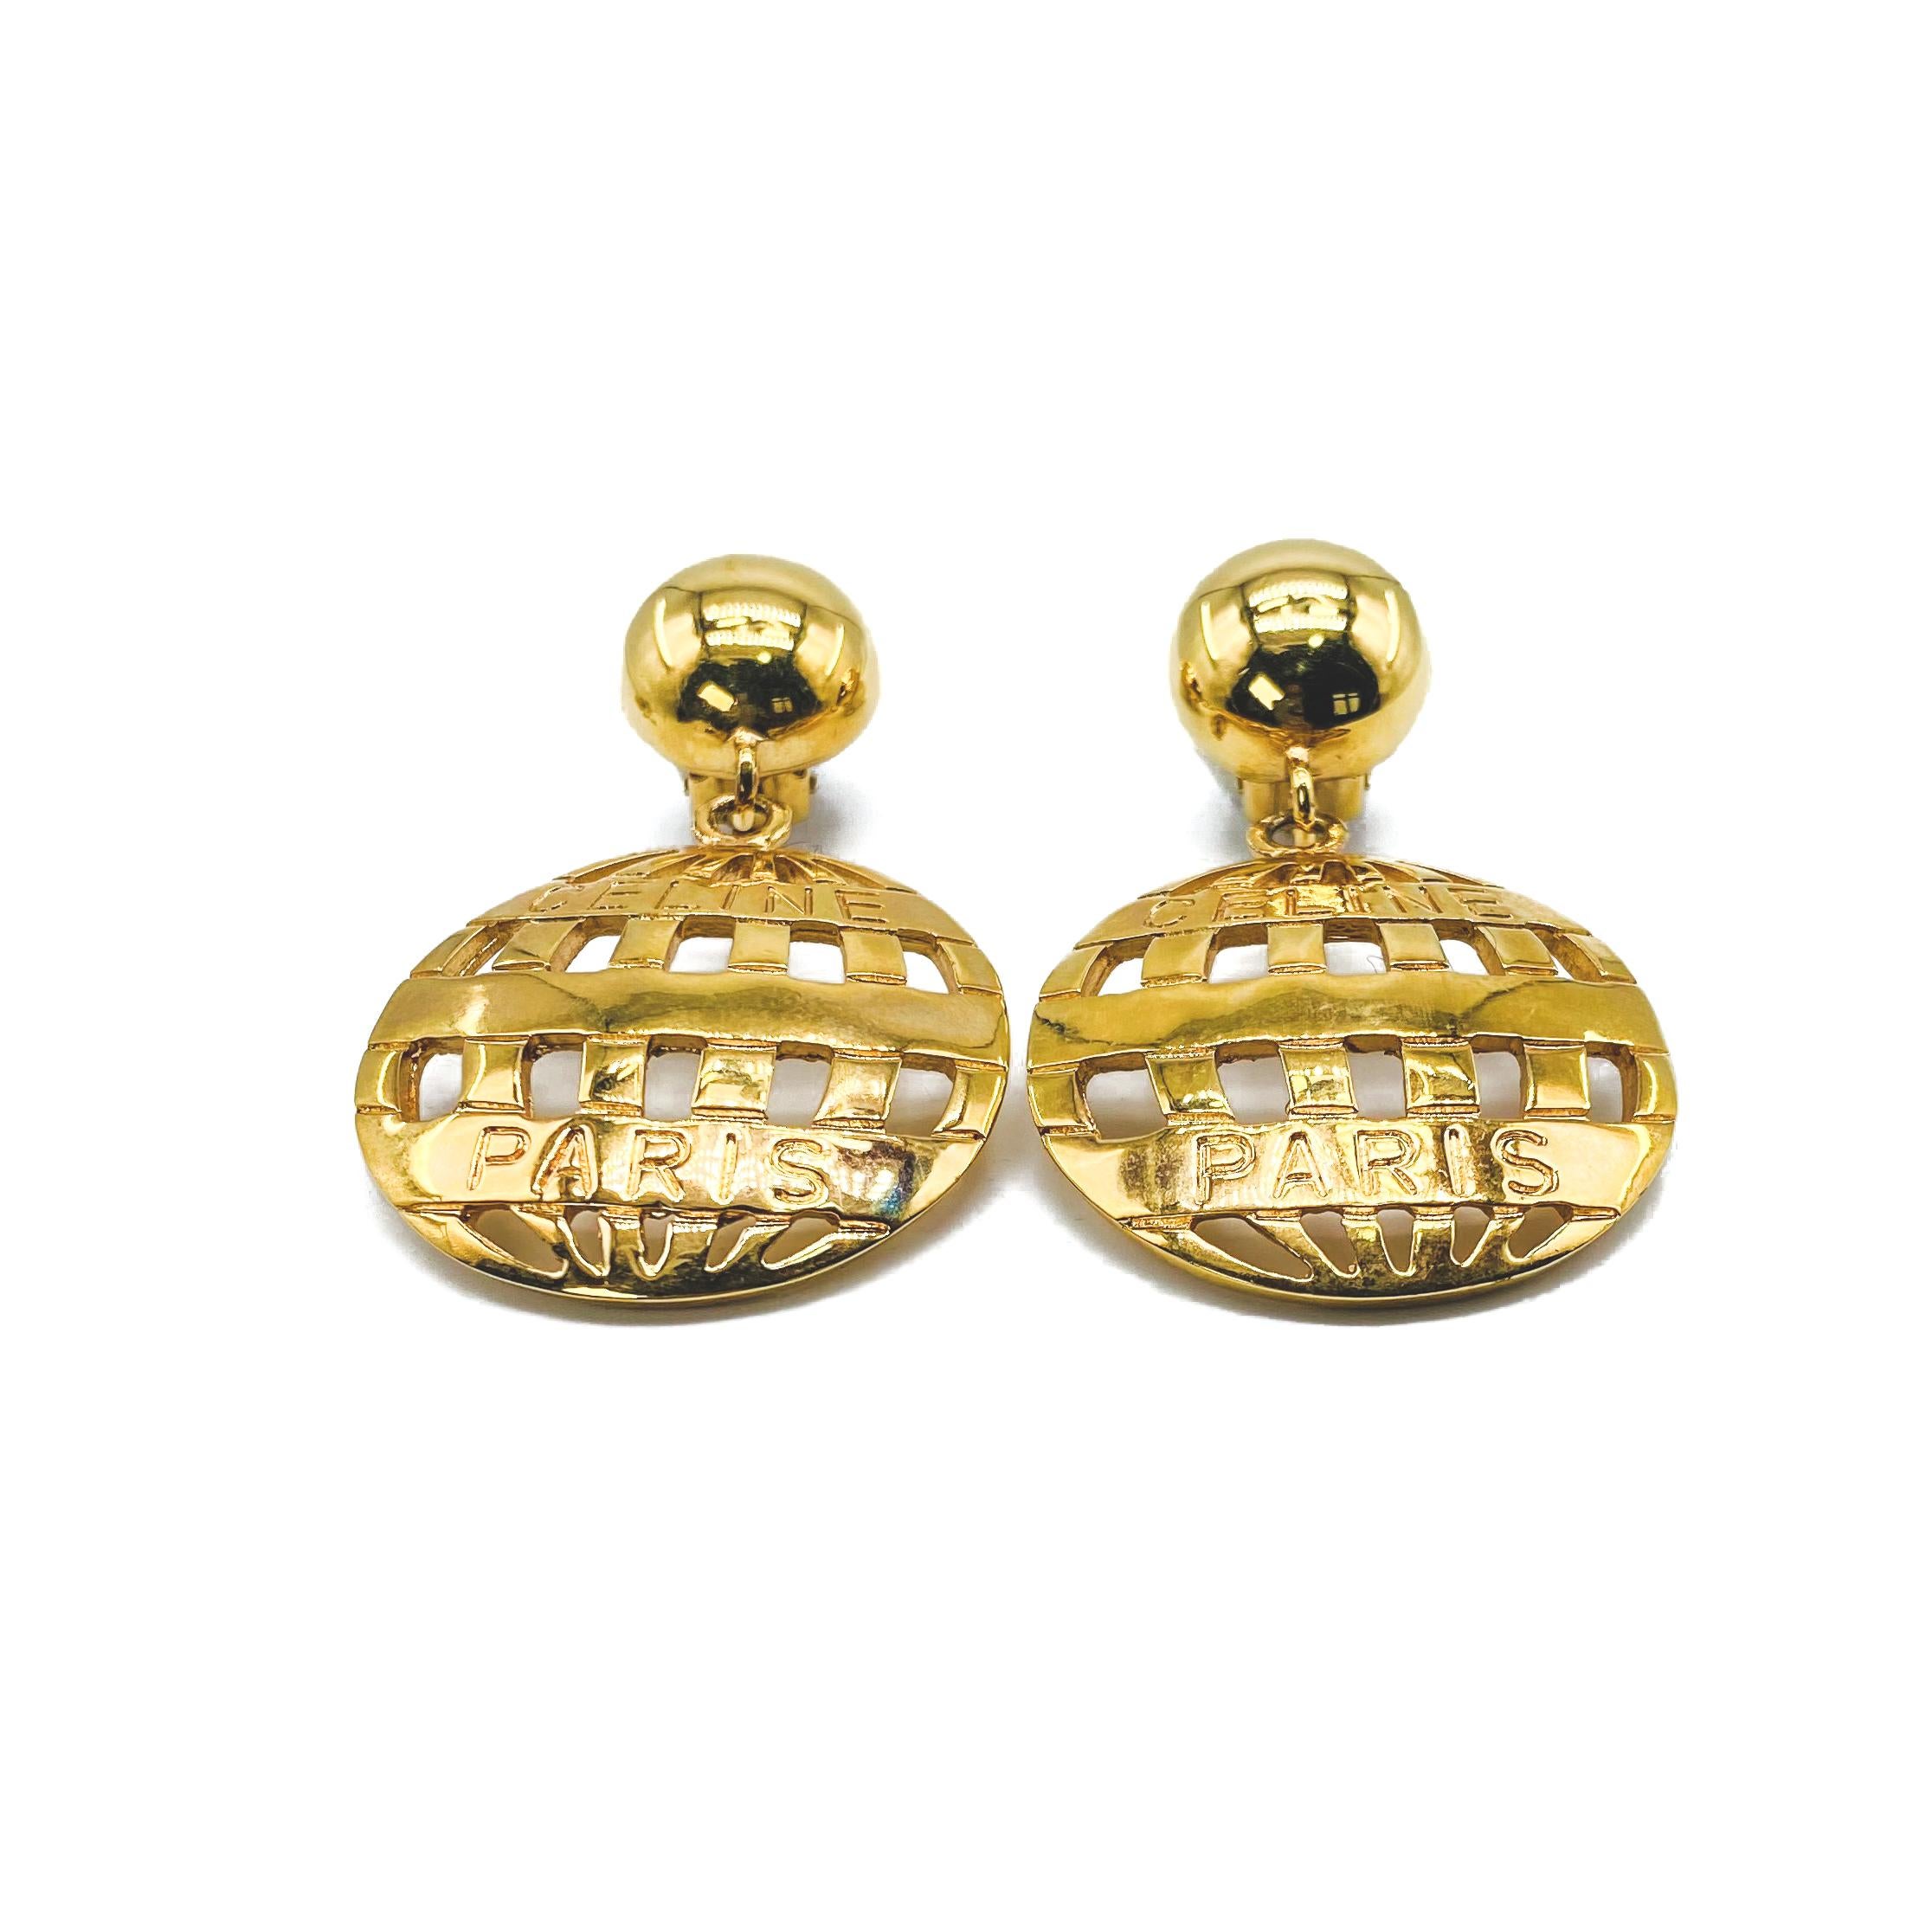 Celine Vintage 1990s Clip On Earrings

Incredible statement drop earrings from the house of Celine

Detail
-Made in Italy in the early 1990s 
-Crafted from gold plated metal
-Embossed with Celine Paris

Size & Fit
-Length approx 2.5 inches
-Width